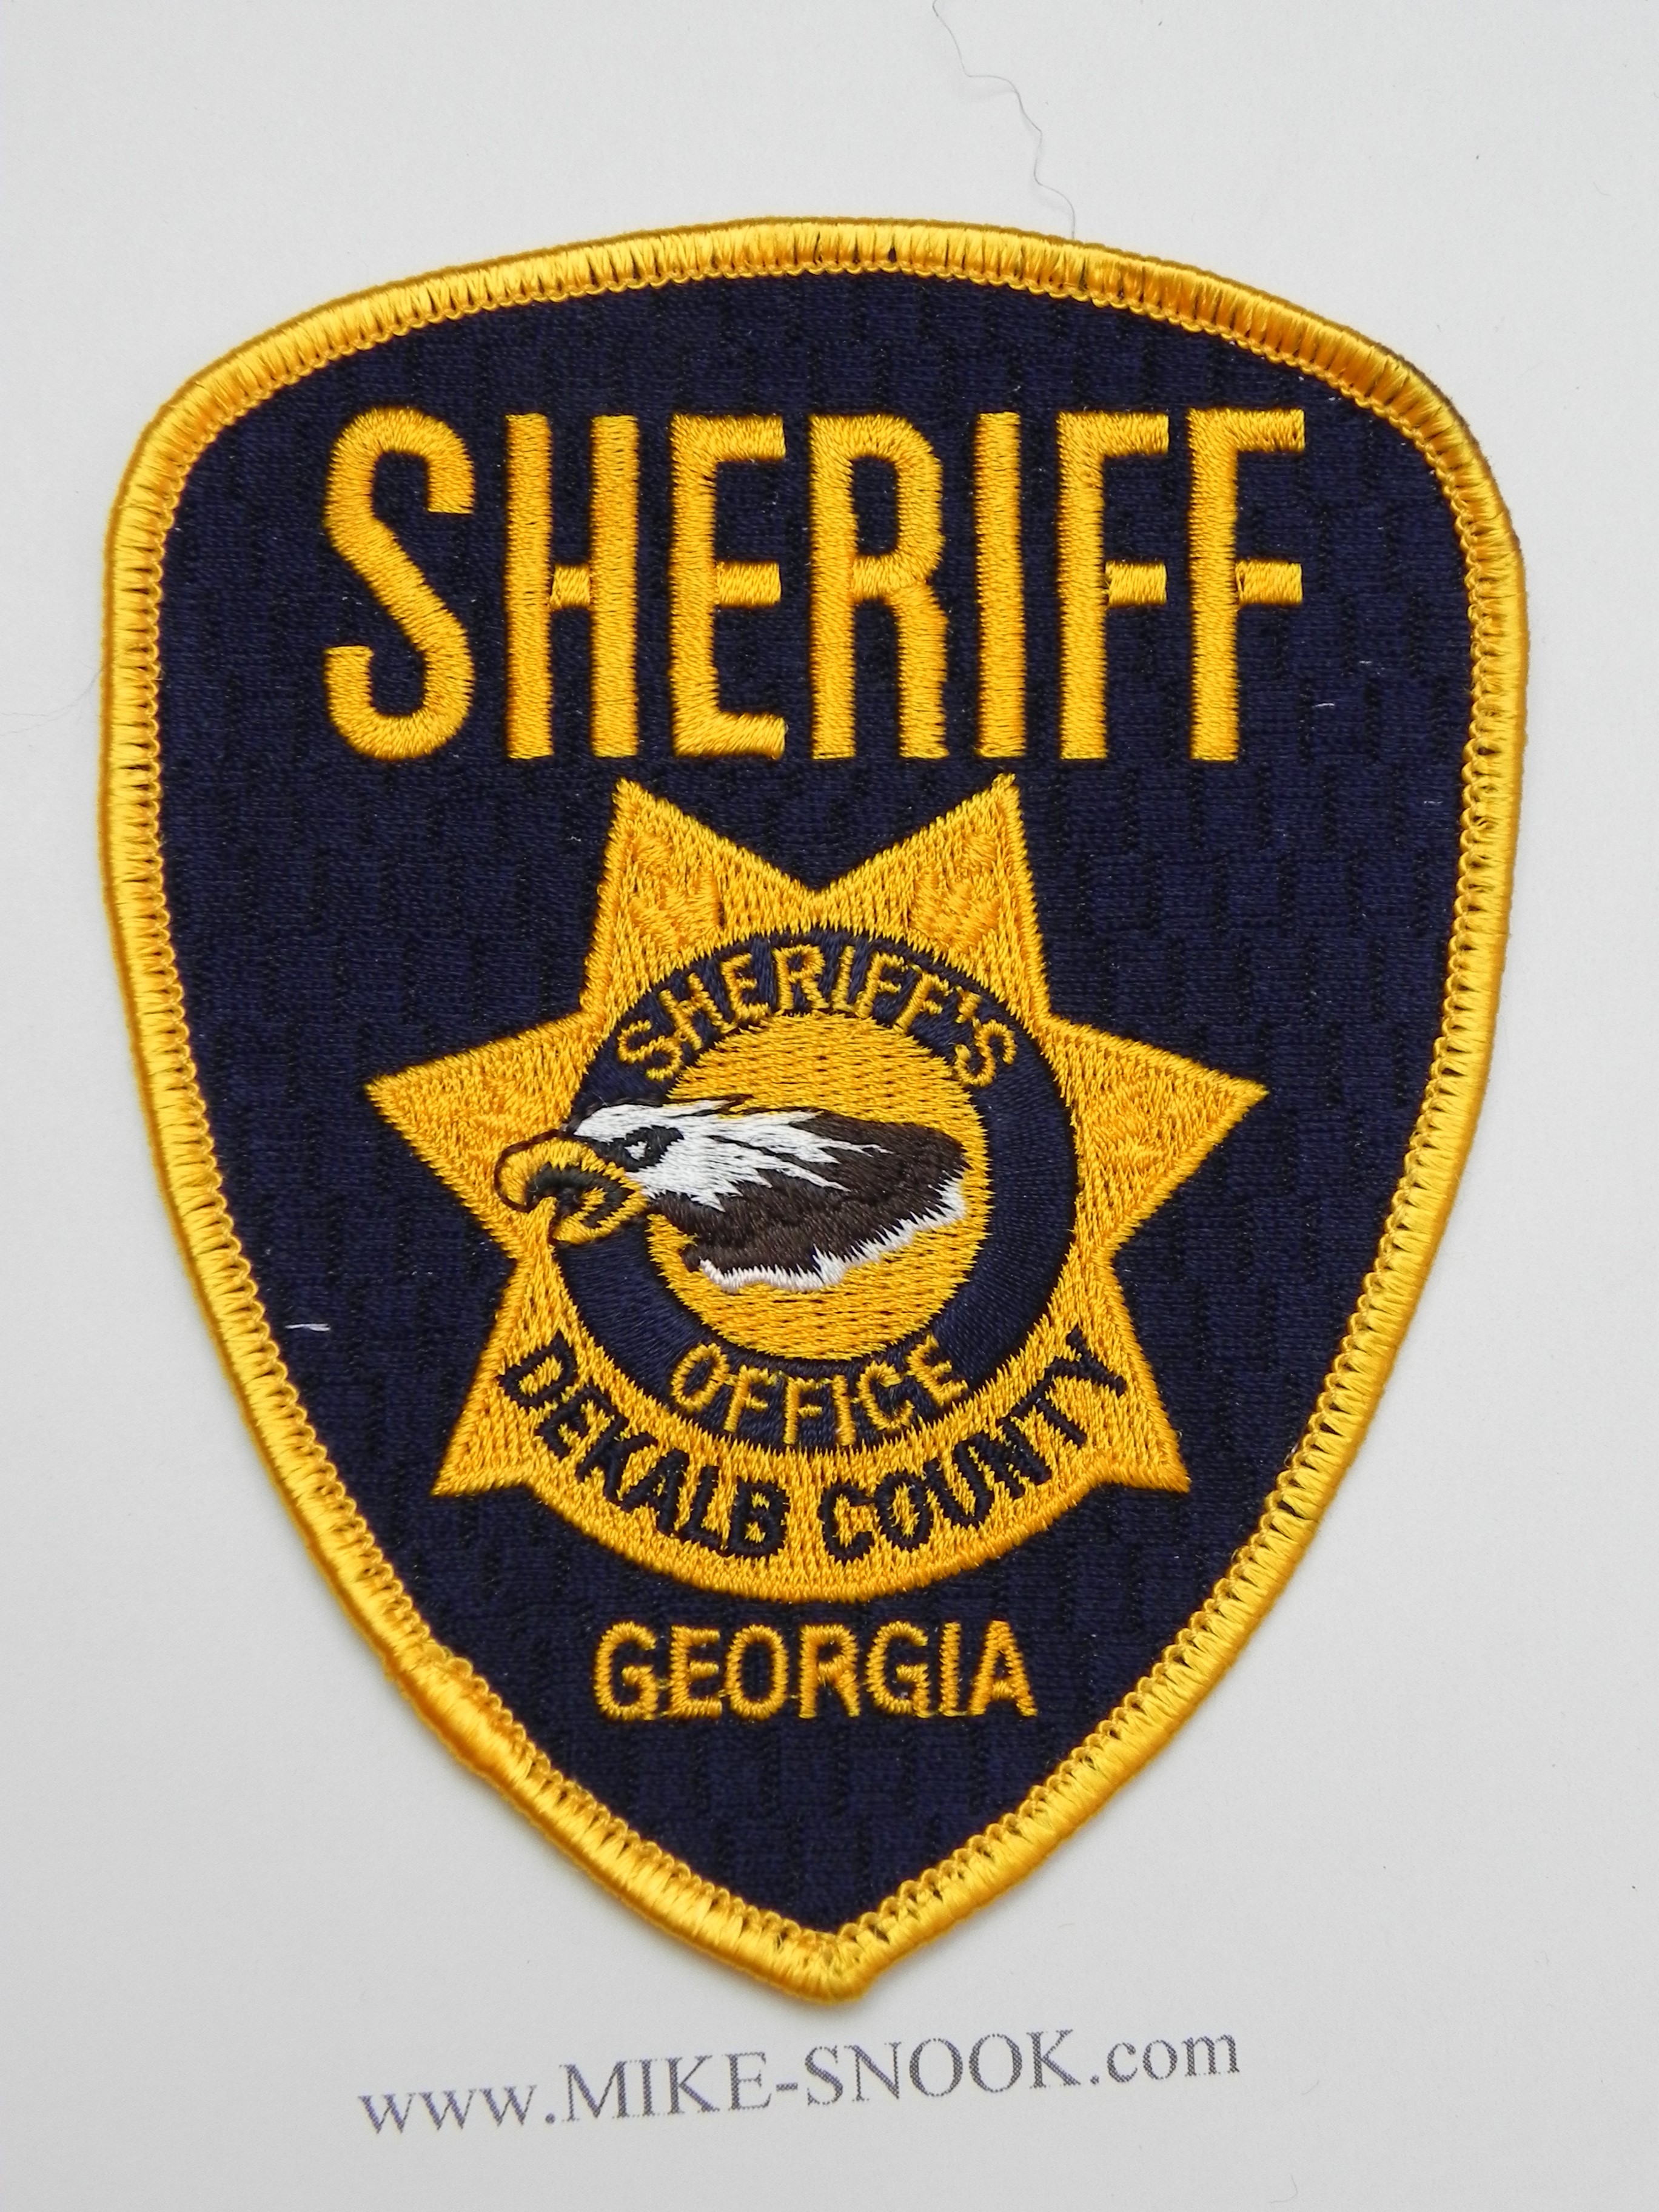 MARIETTA GEORGIA GA Special Weapons And Tactics SWAT POLICE PATCH 